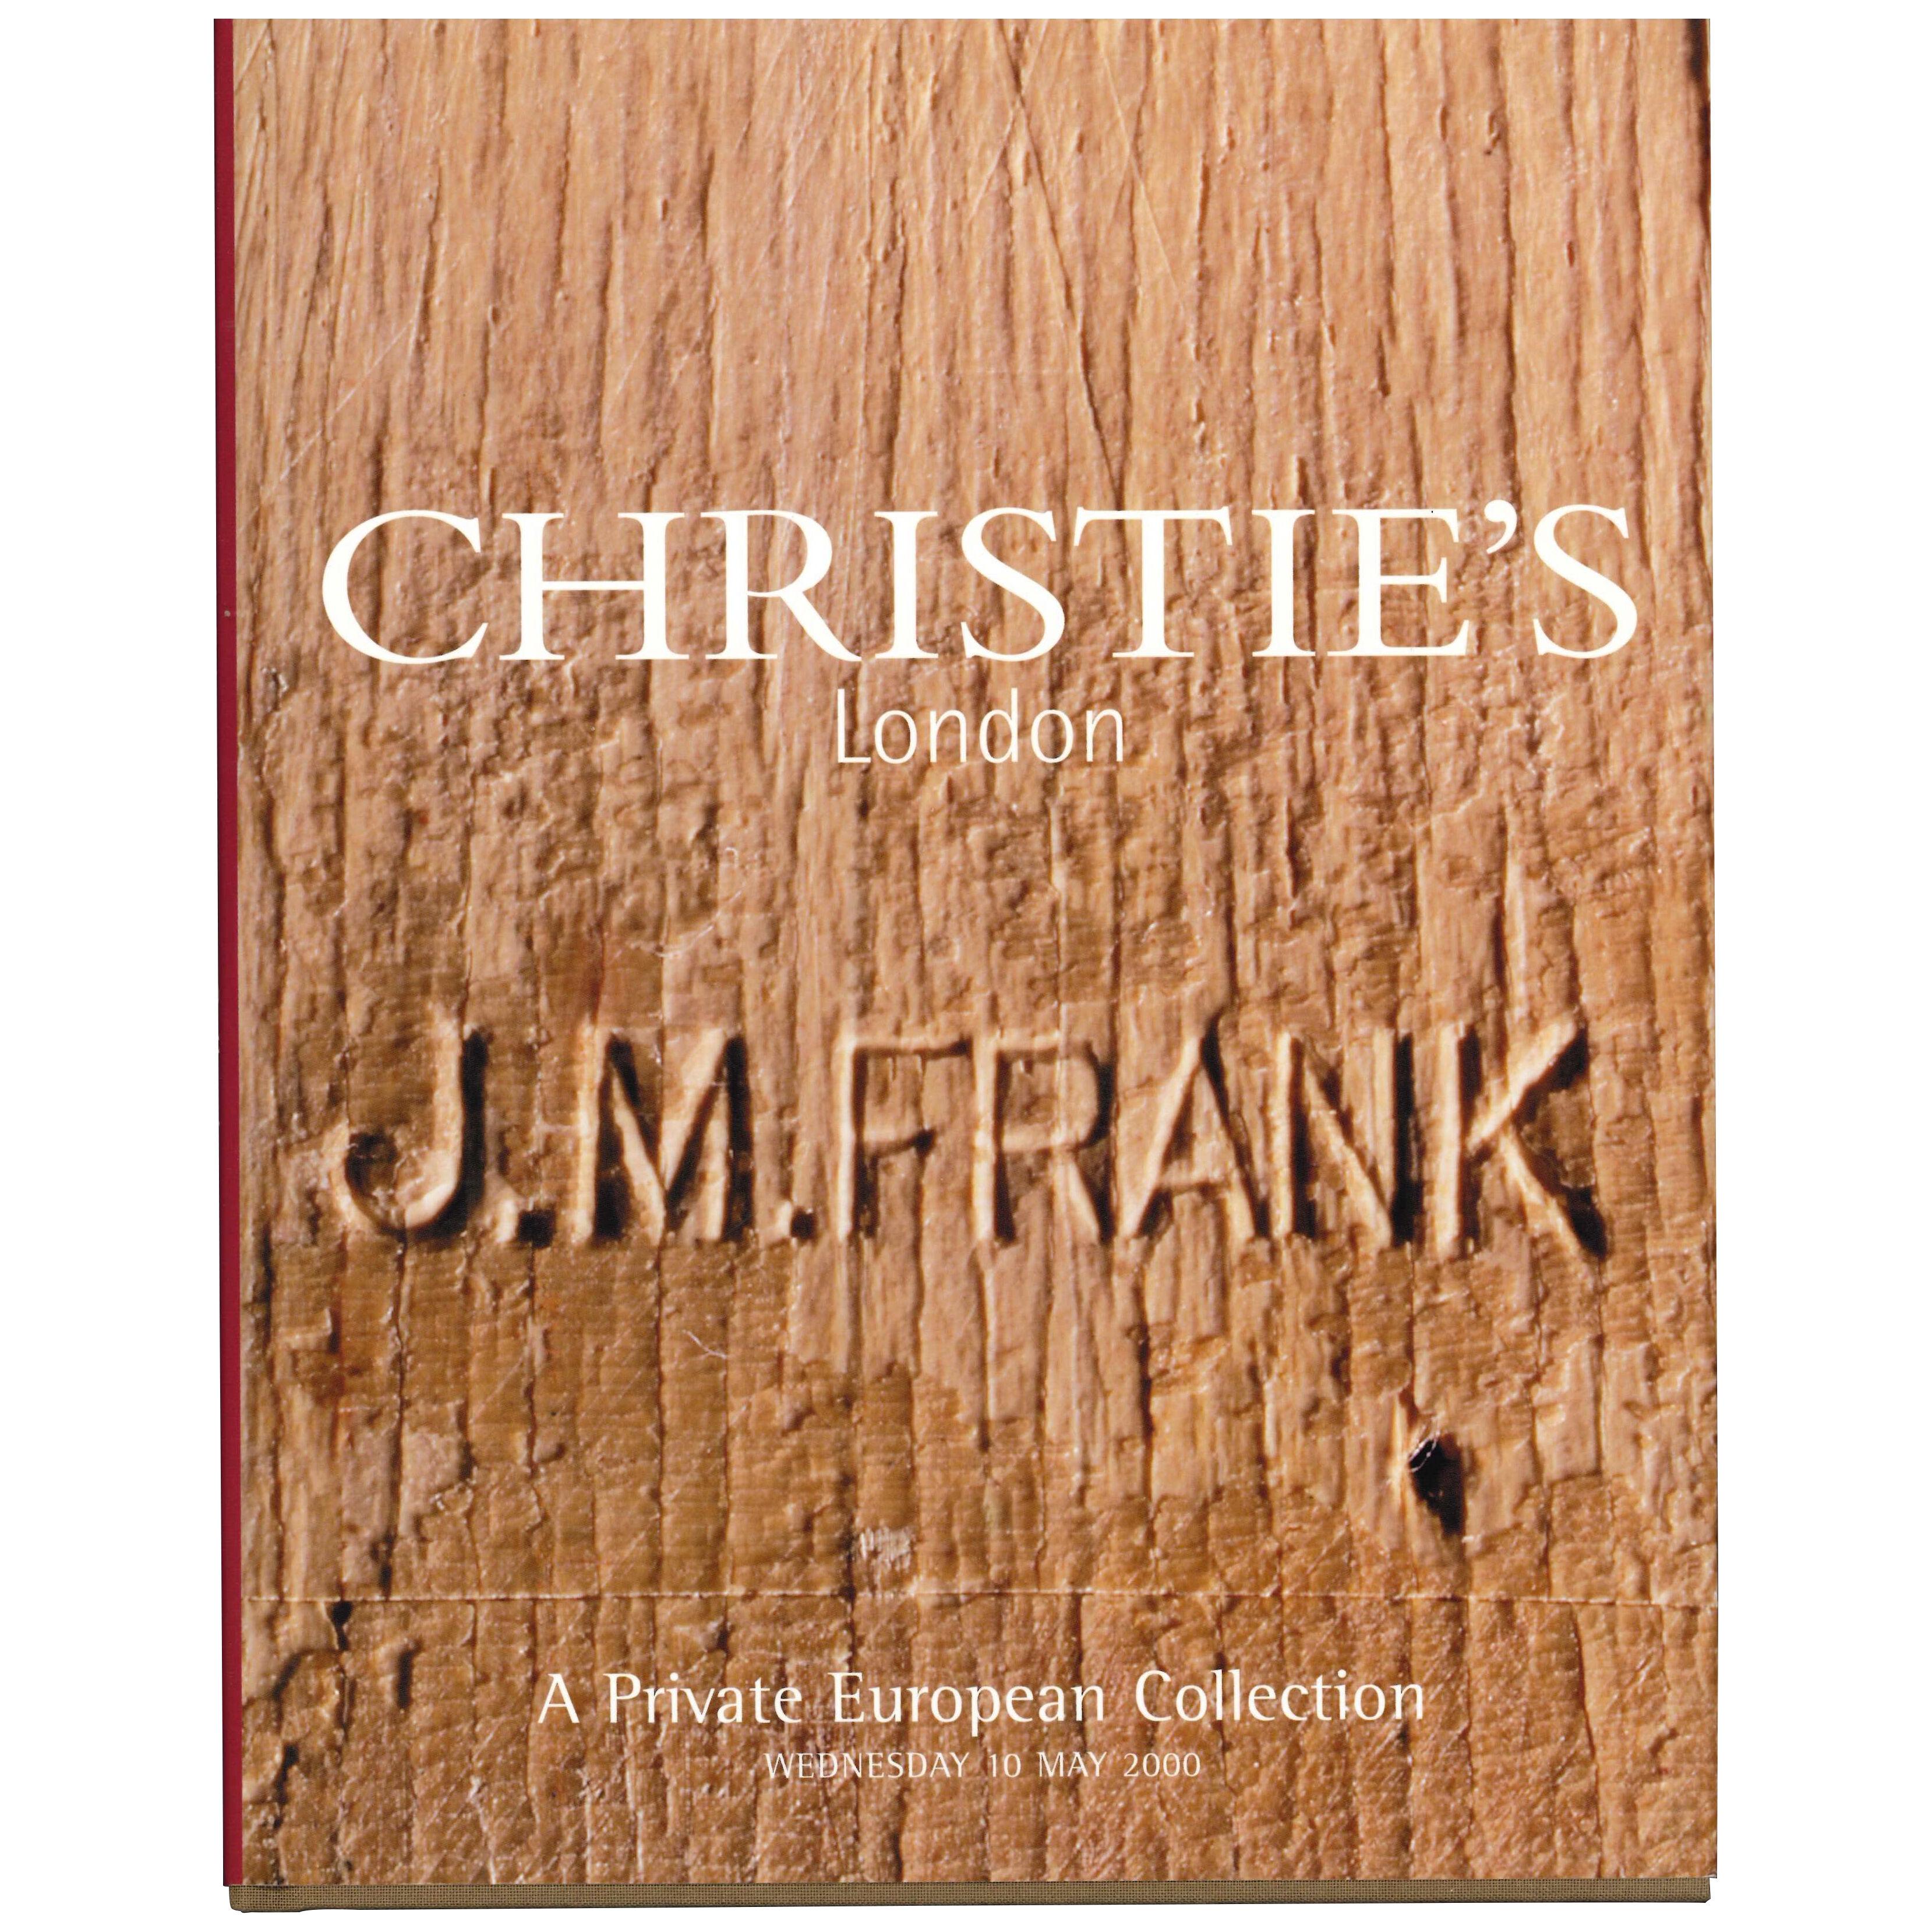 A PRIVATE EUROPEAN COLLECTION - Christie's London May 2000 (book)